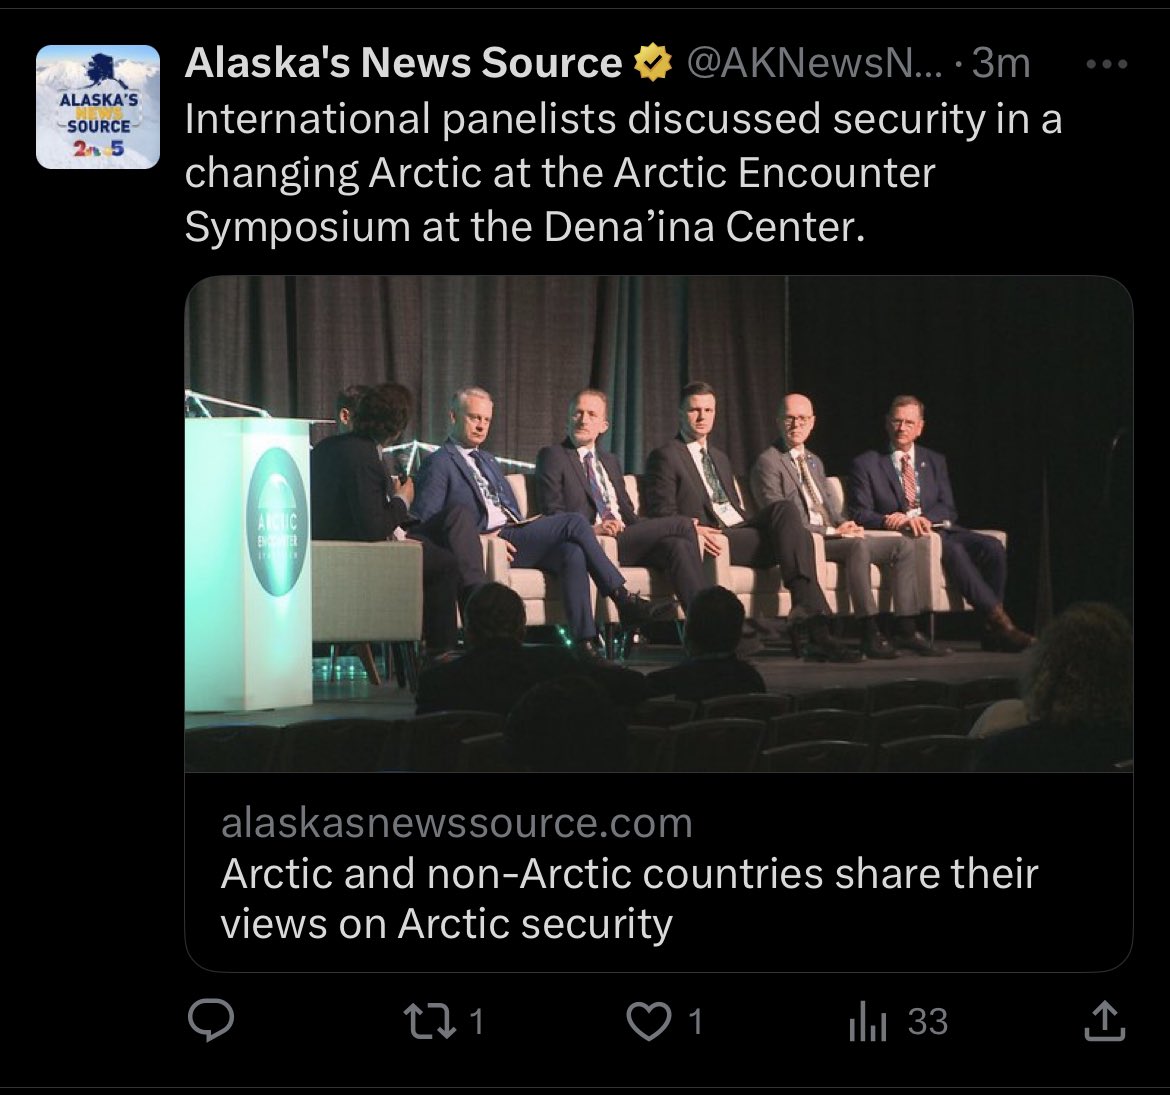 I wonder if they could have gotten more slender, clean-shaven, white men to talk about the Arctic? #ArcticEncounter